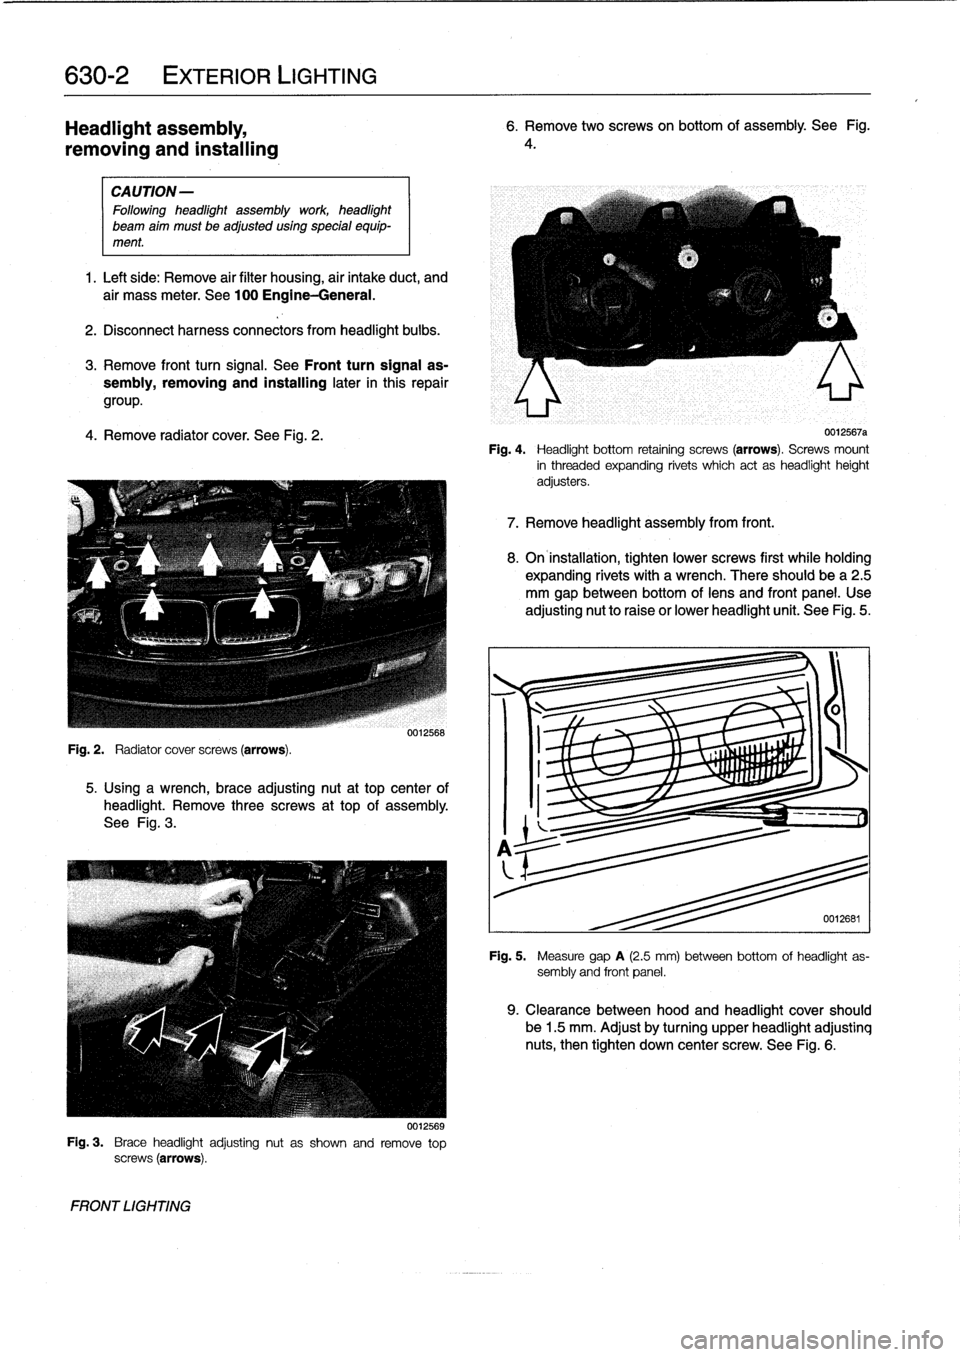 BMW 318i 1997 E36 Workshop Manual 
630-2

	

EXTERIOR
LIGHTING

Headlight
assembly,

removing
and
installing

CAUTION-

Followingheadlight
assembly
work
headlight

beam
aim
must
be
adjusted
using
special
equip-
ment
.

1
.
Left
side
: